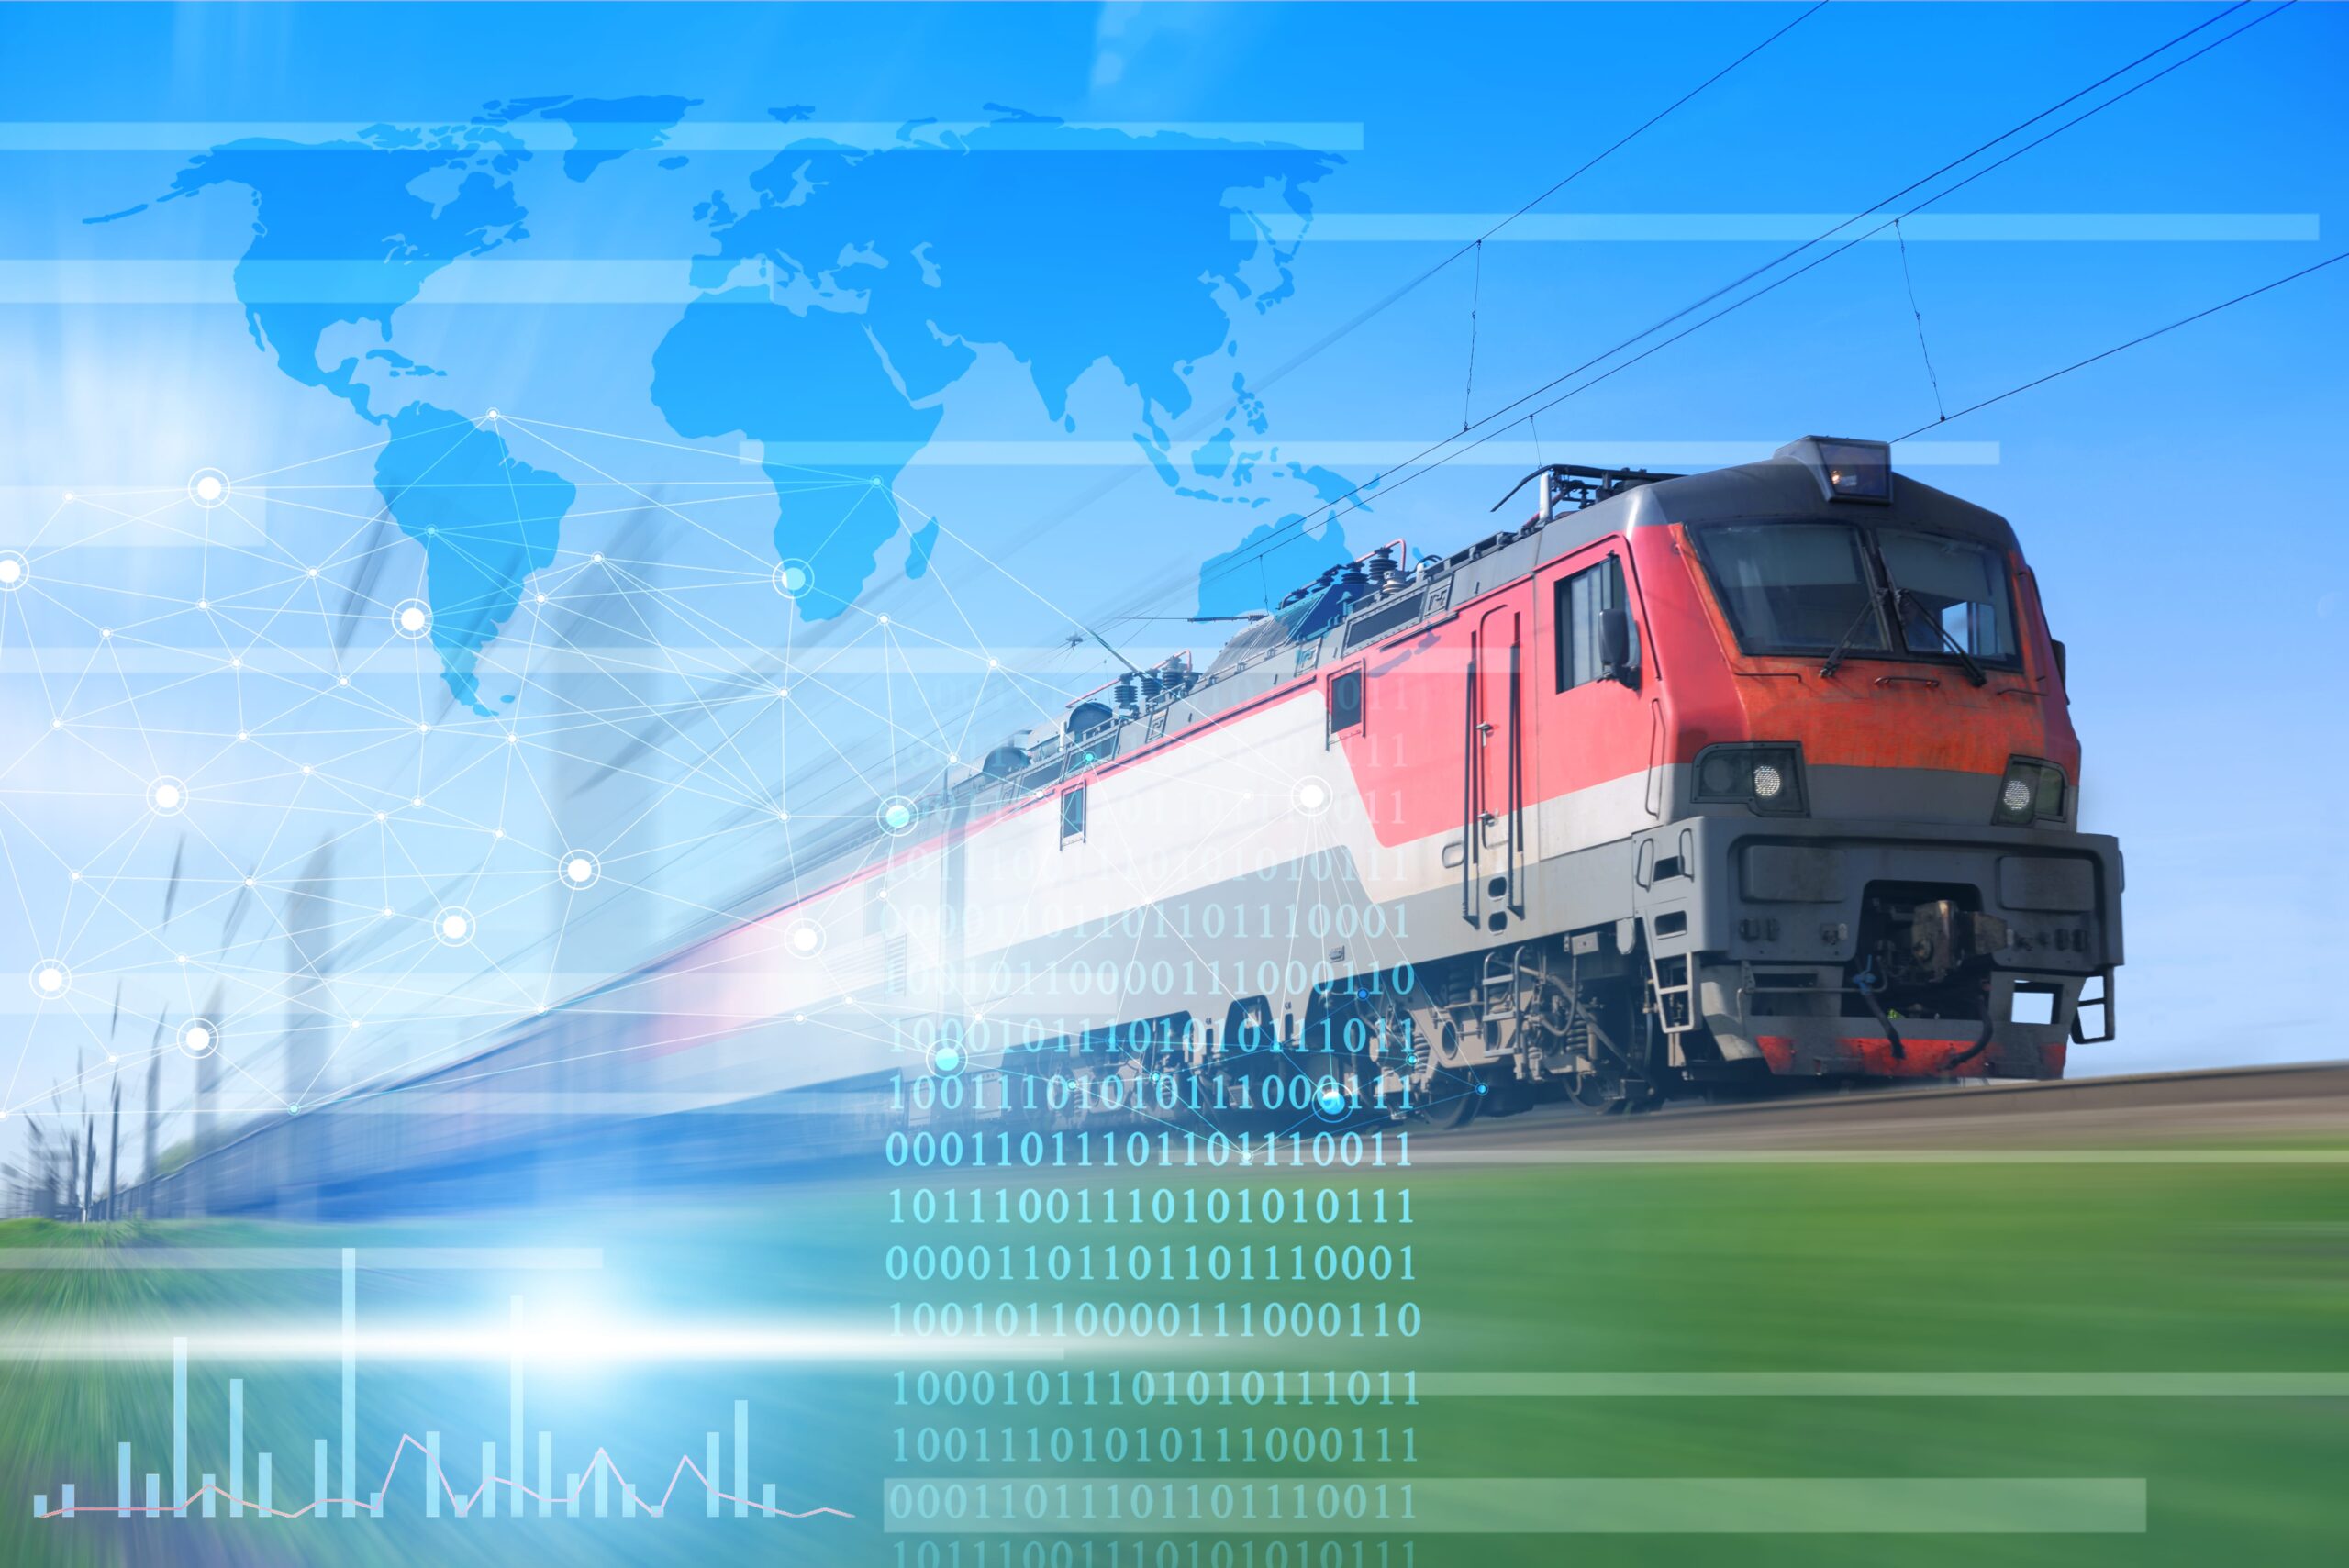 5 ways the Internet of Things can improve rail travel